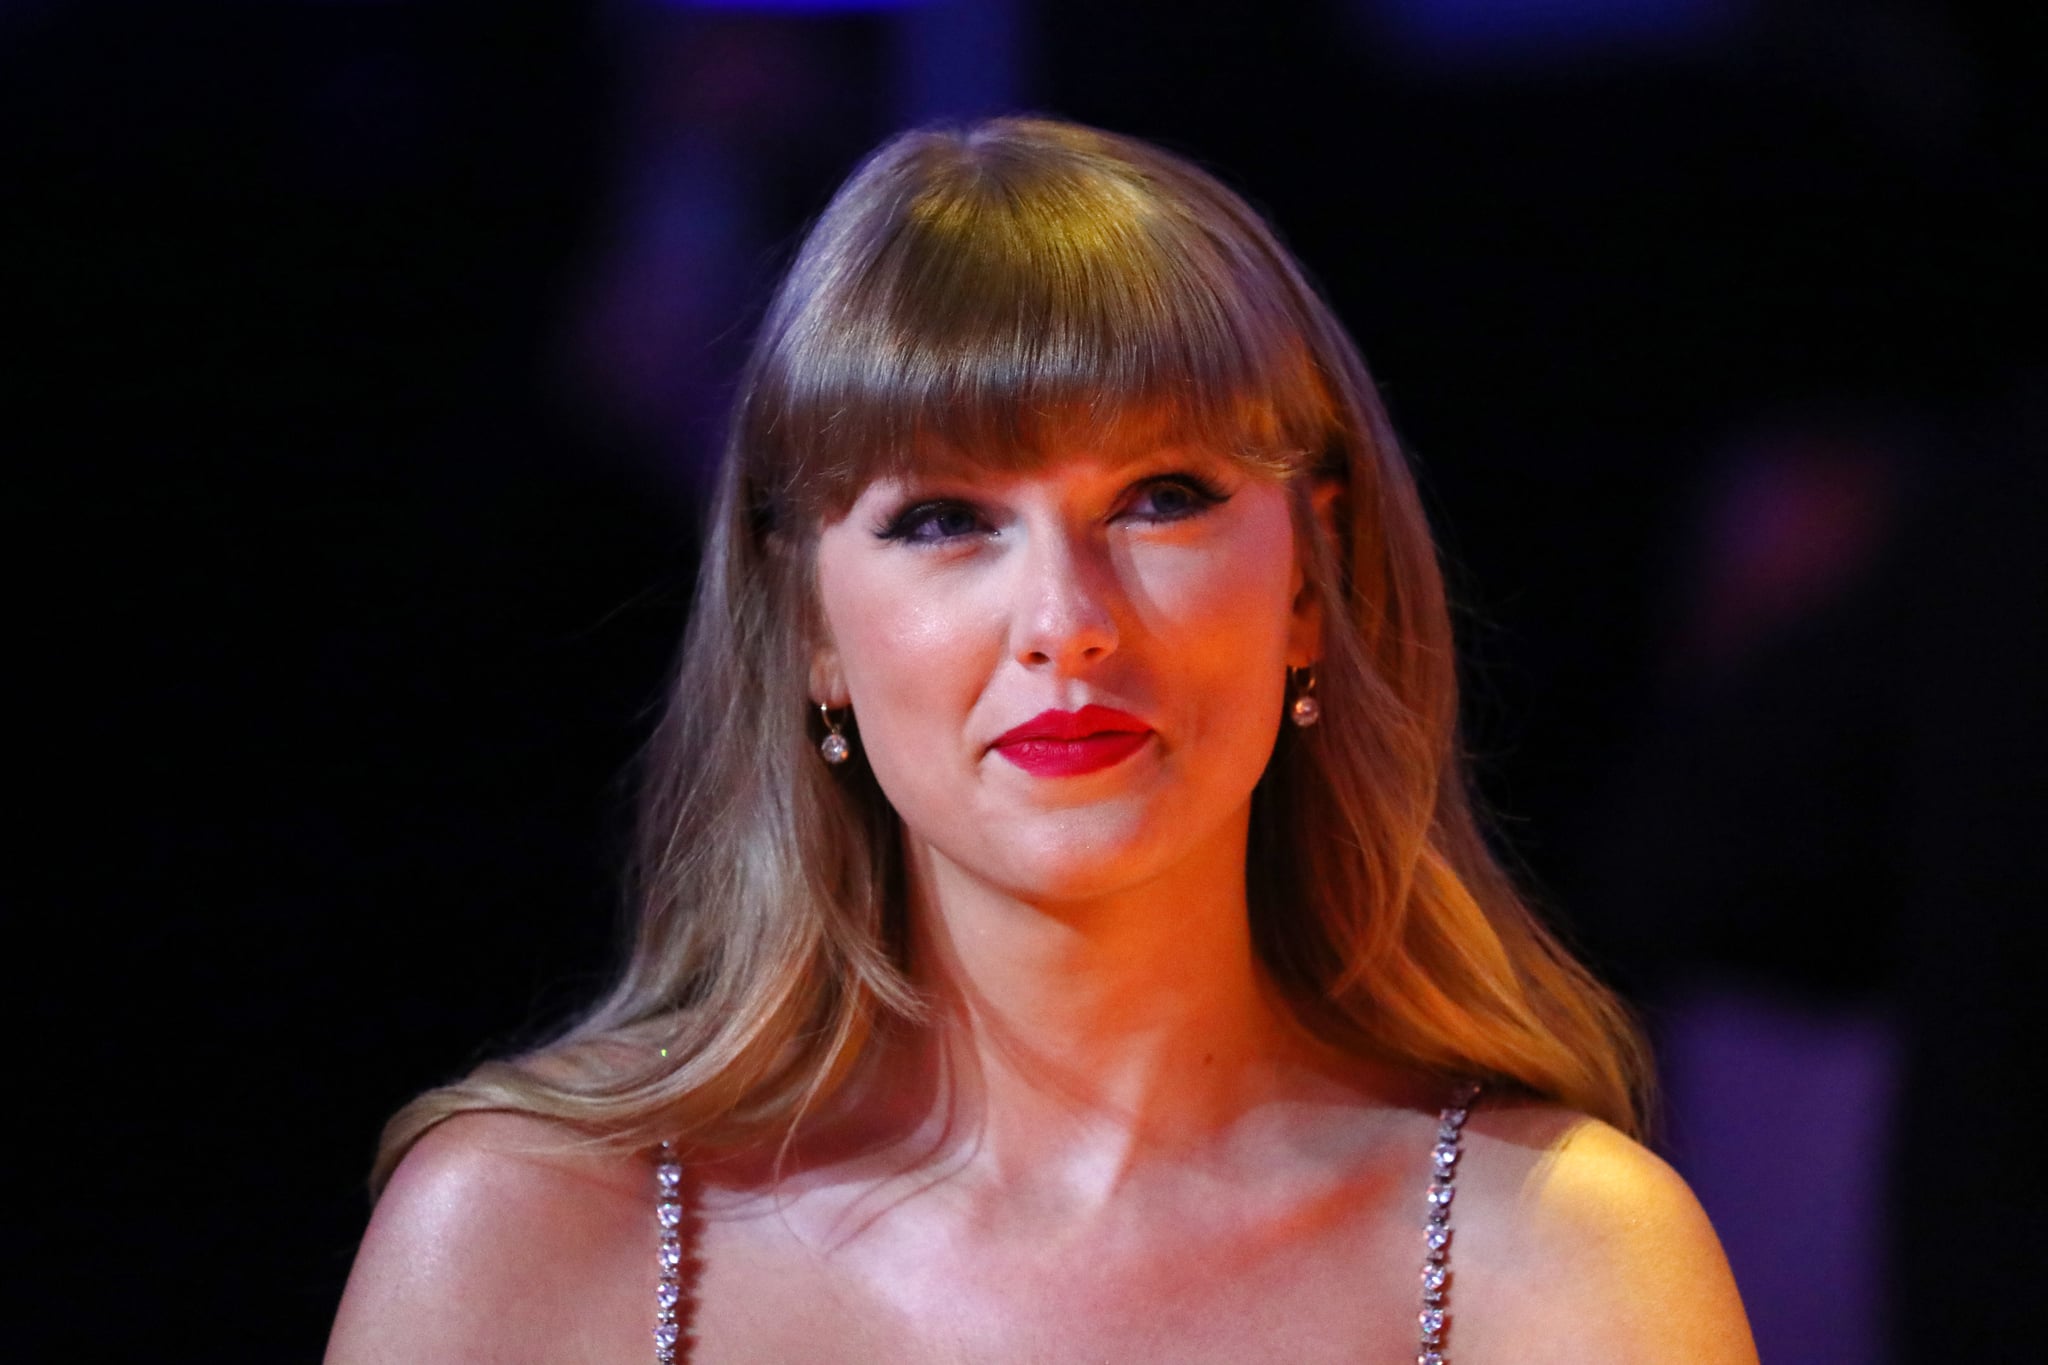 Taylor Swift smiles at the BRIT Awards at the O2 Arena on May 11, 2021 in London, England.  (Photo by JMEnternational/JMEnternational for BRIT Awards/Getty Images)